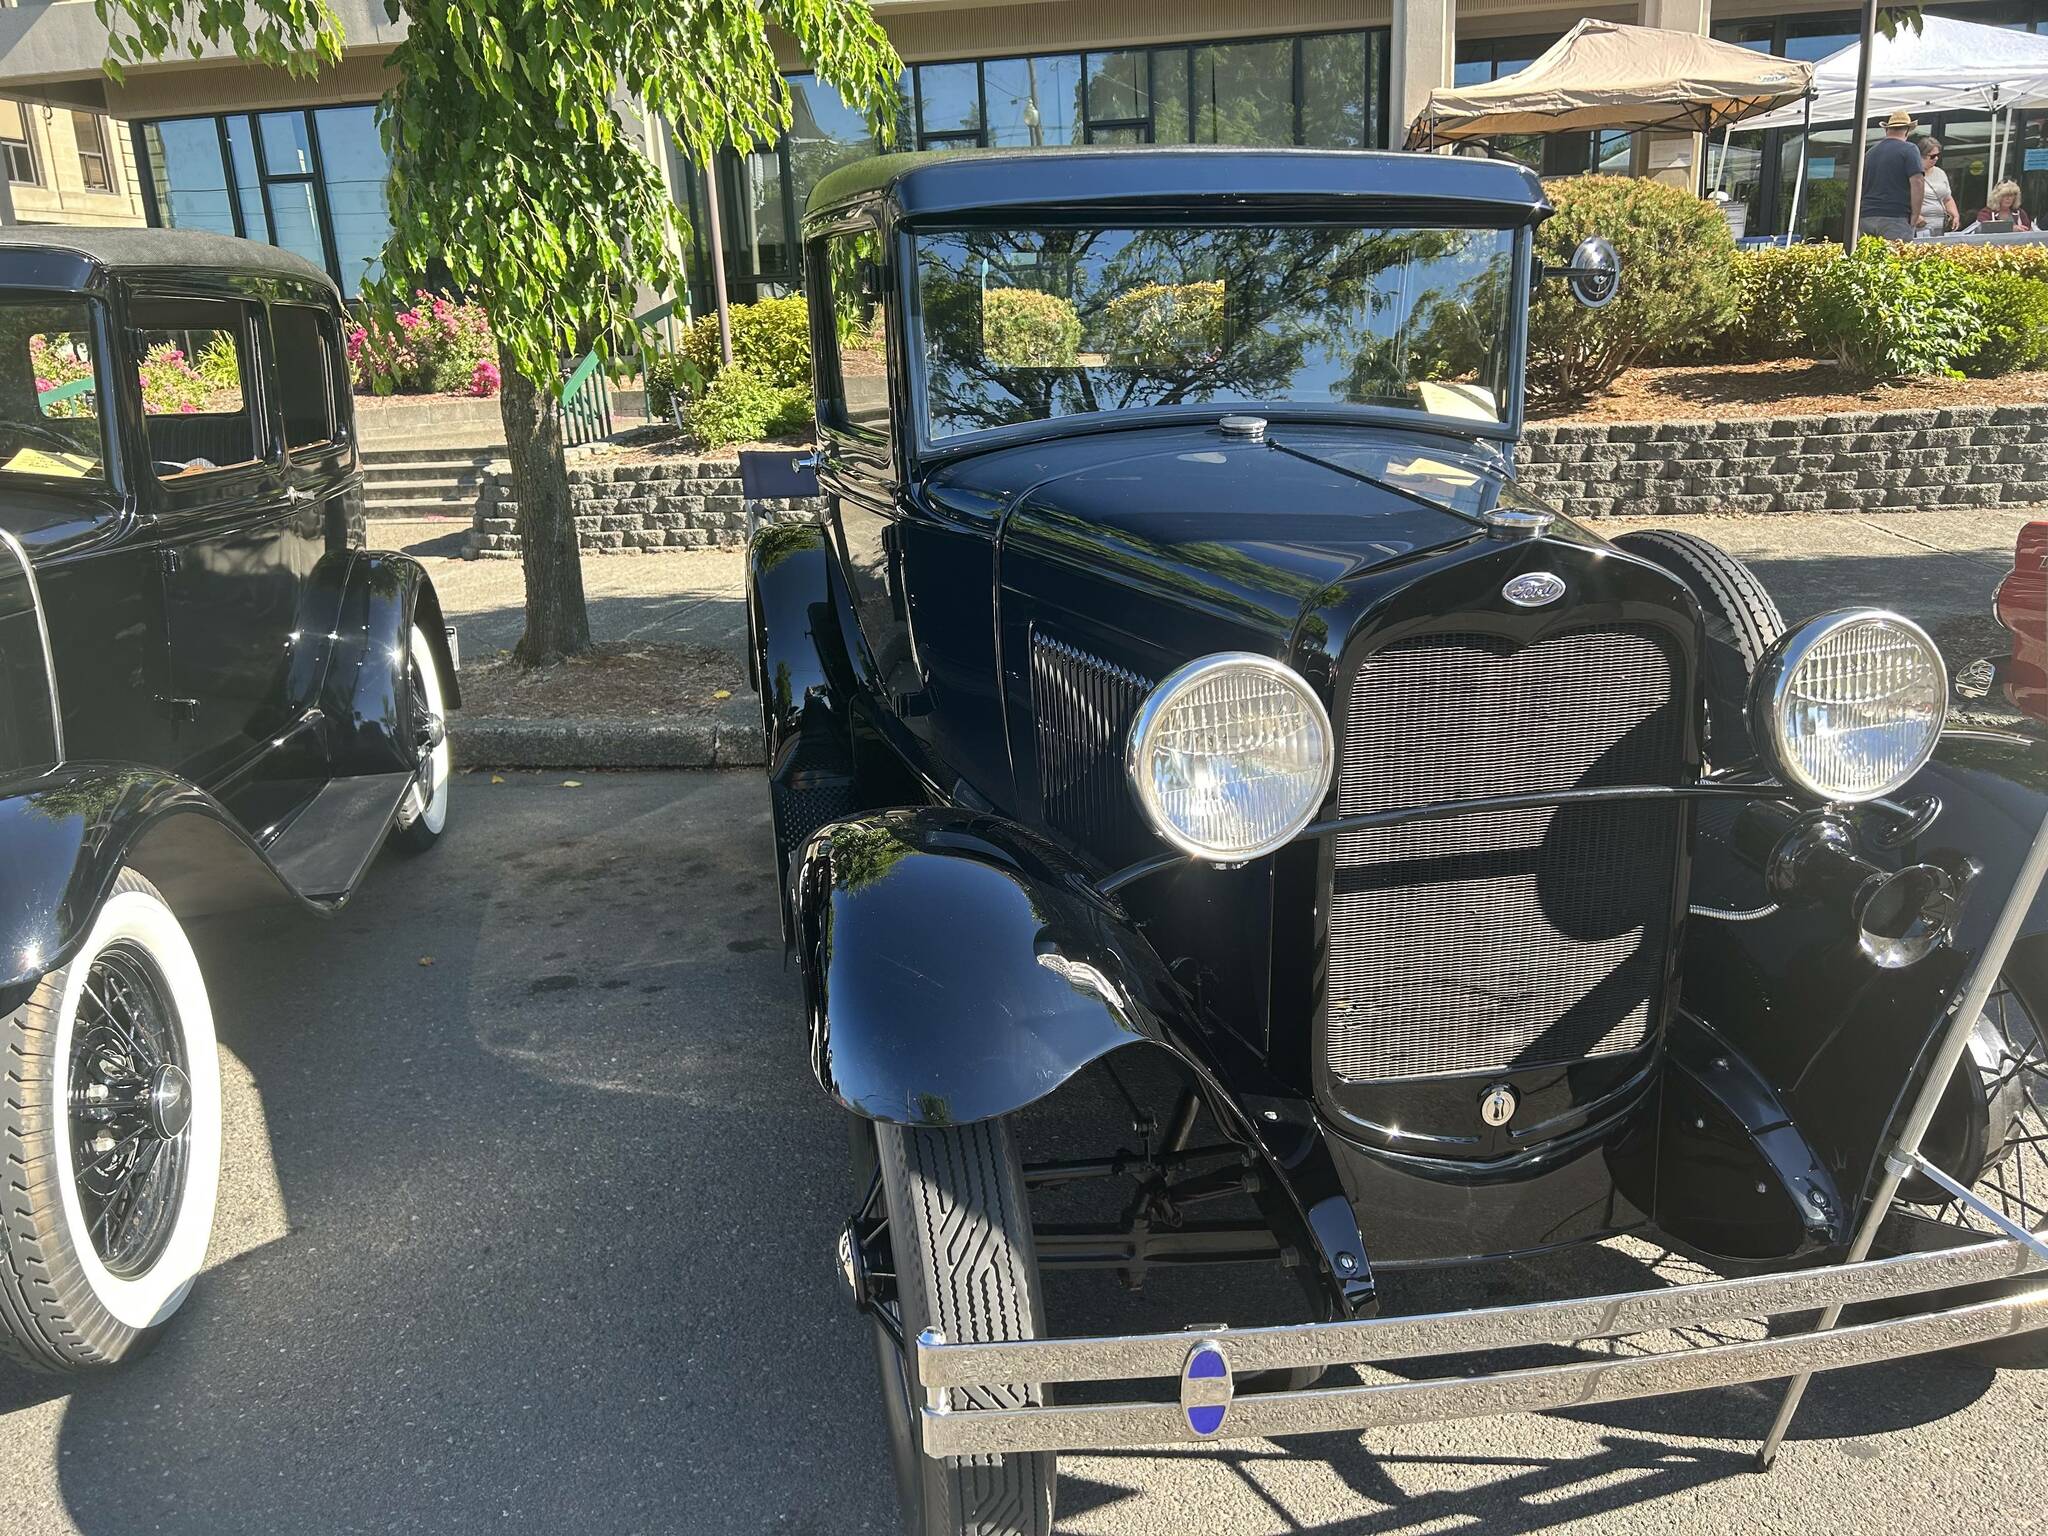 A 1931 Ford was one of the oldest automobiles on display at the 21st Historic Montesano Car show on July 15. (Lillian Saeger / The Daily World)